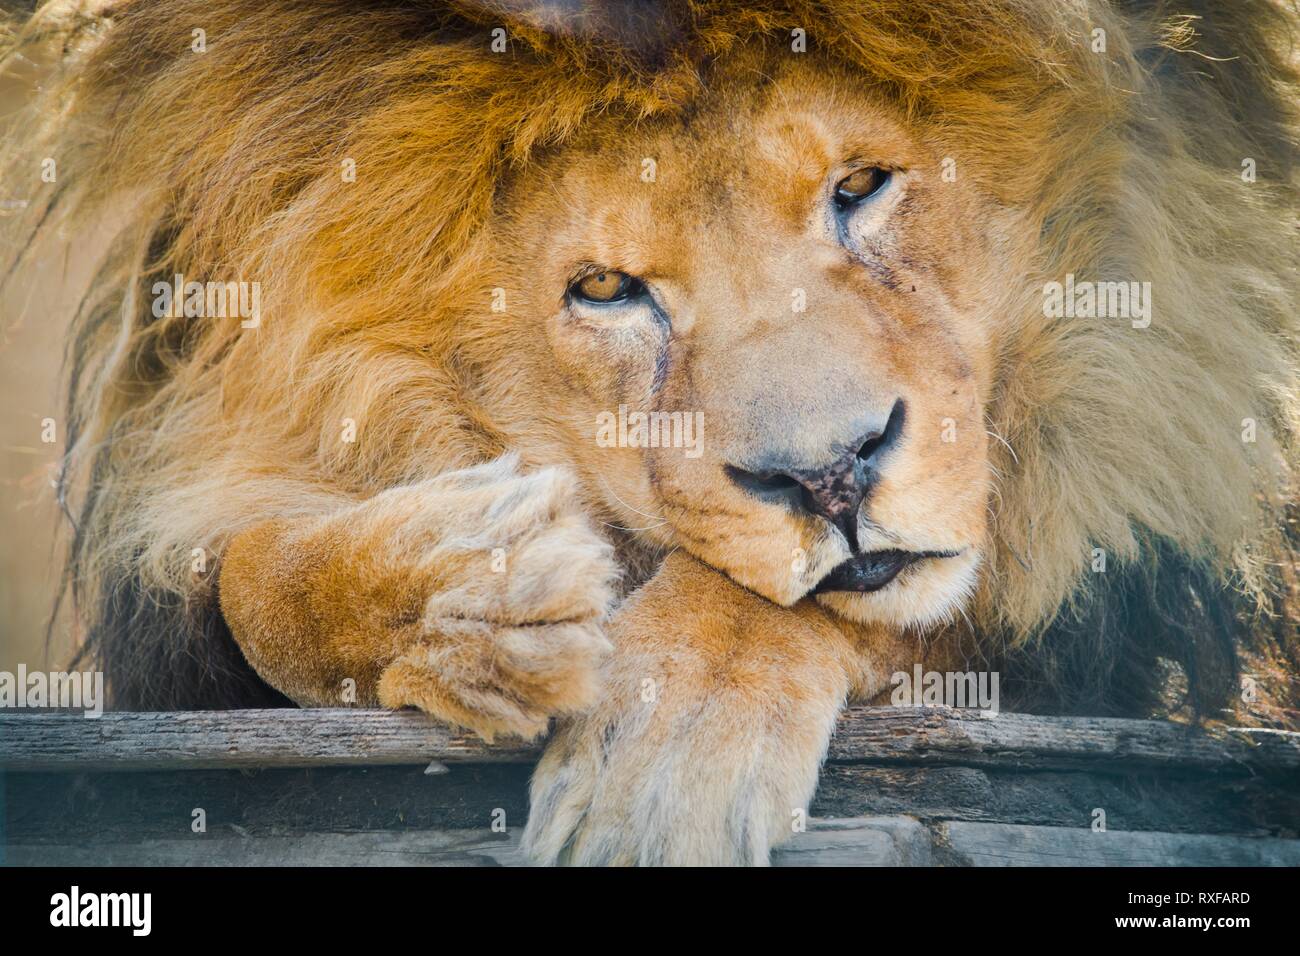 Old sad lion sitting in 'prison'. Eye contact with camera. Animals deserve freedom. Stock Photo